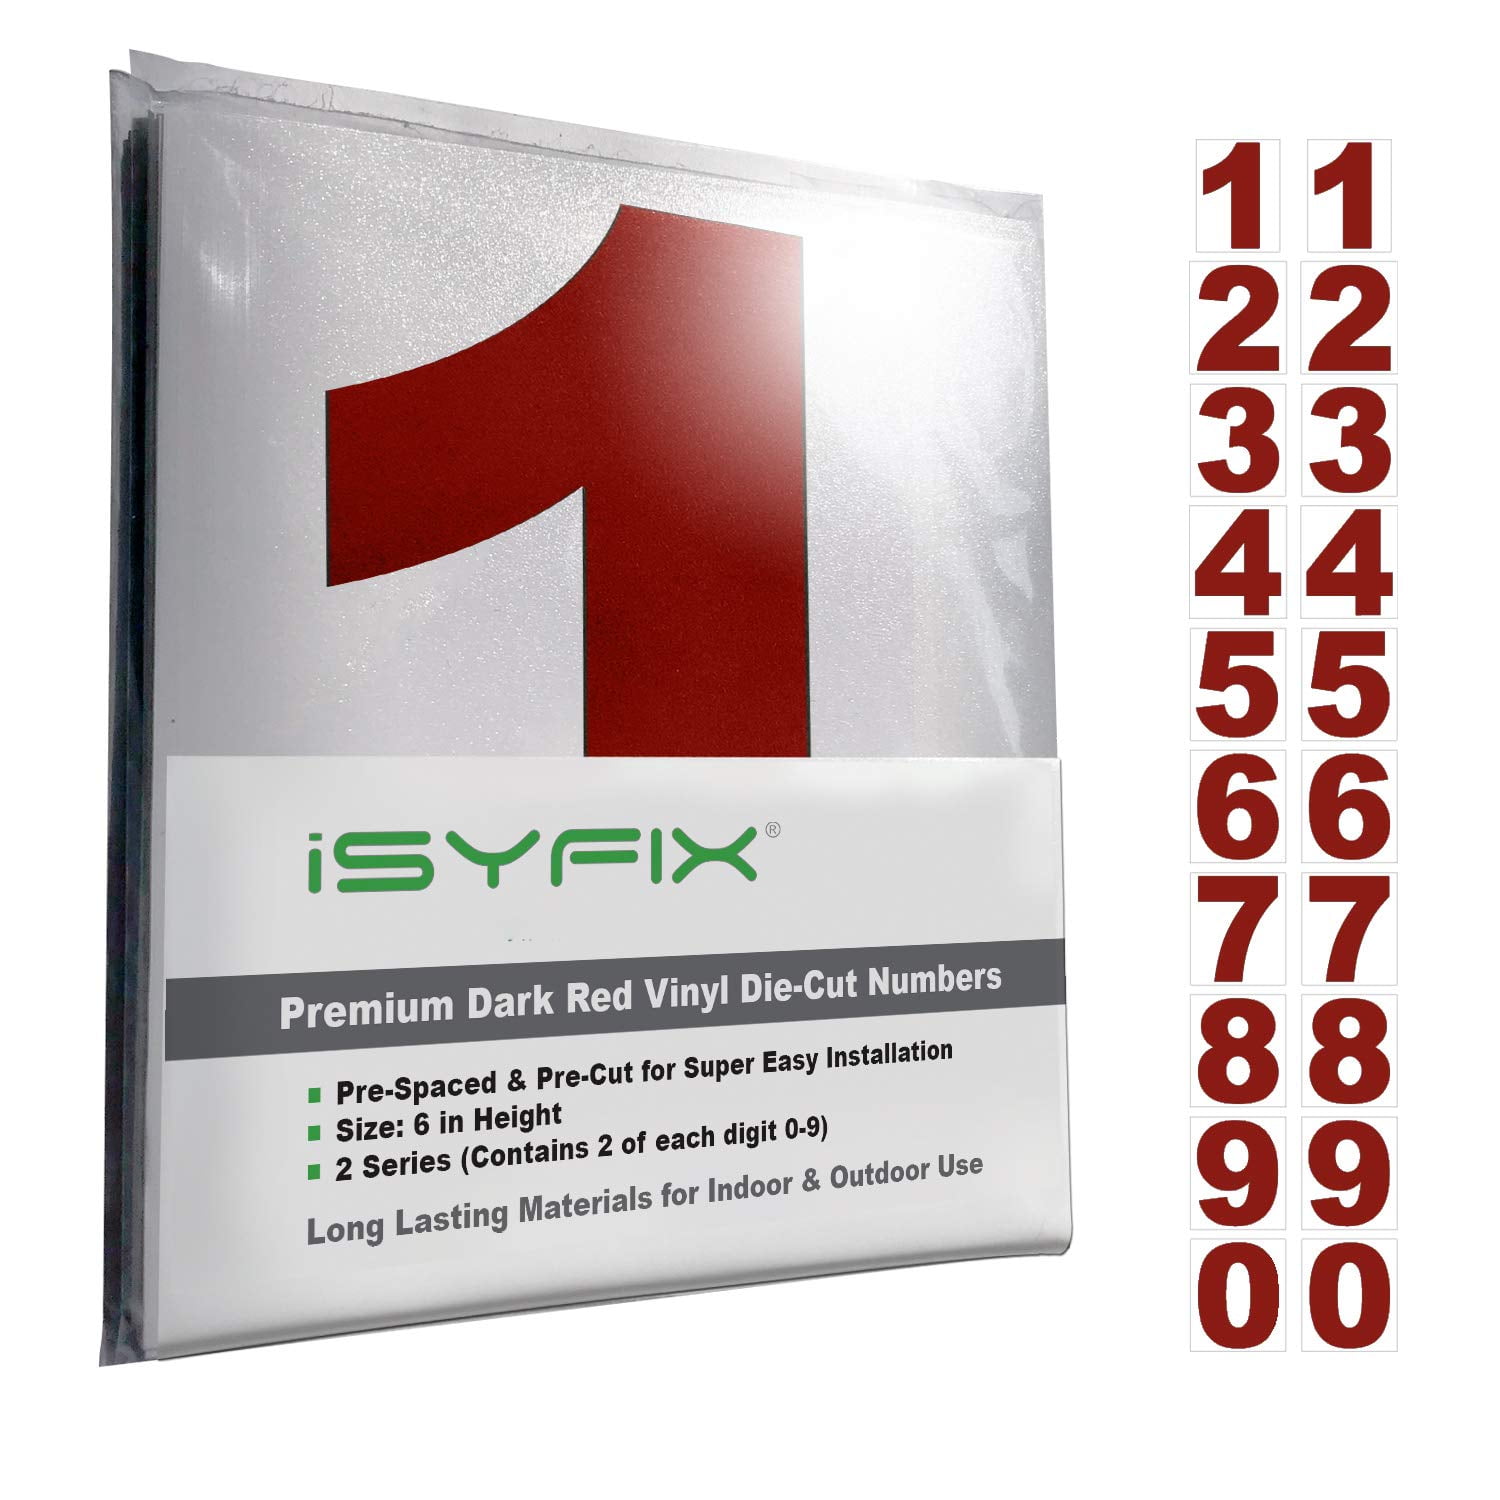 Isyfix Gold Vinyl Numbers Stickers - 4 inch Self Adhesive - 2 Sets - Premium Decal Die Cut & Pre-Spaced for Mailbox Signs Window Door Cars Trucks